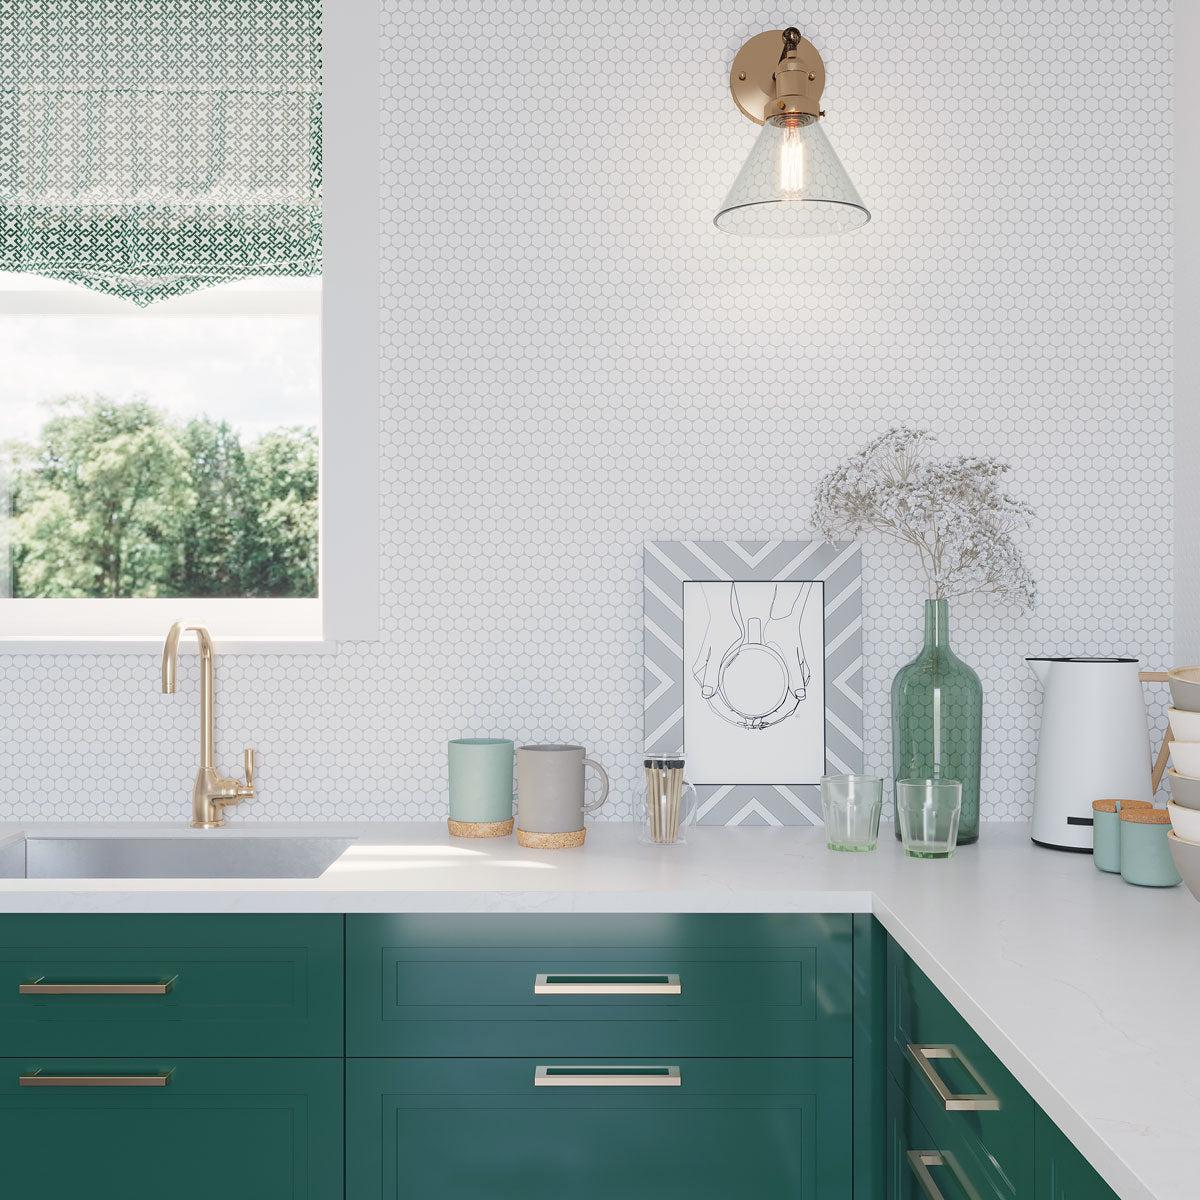 Green, White and Brass Kitchen with Thassos Marble Penny Round Tile Backsplash